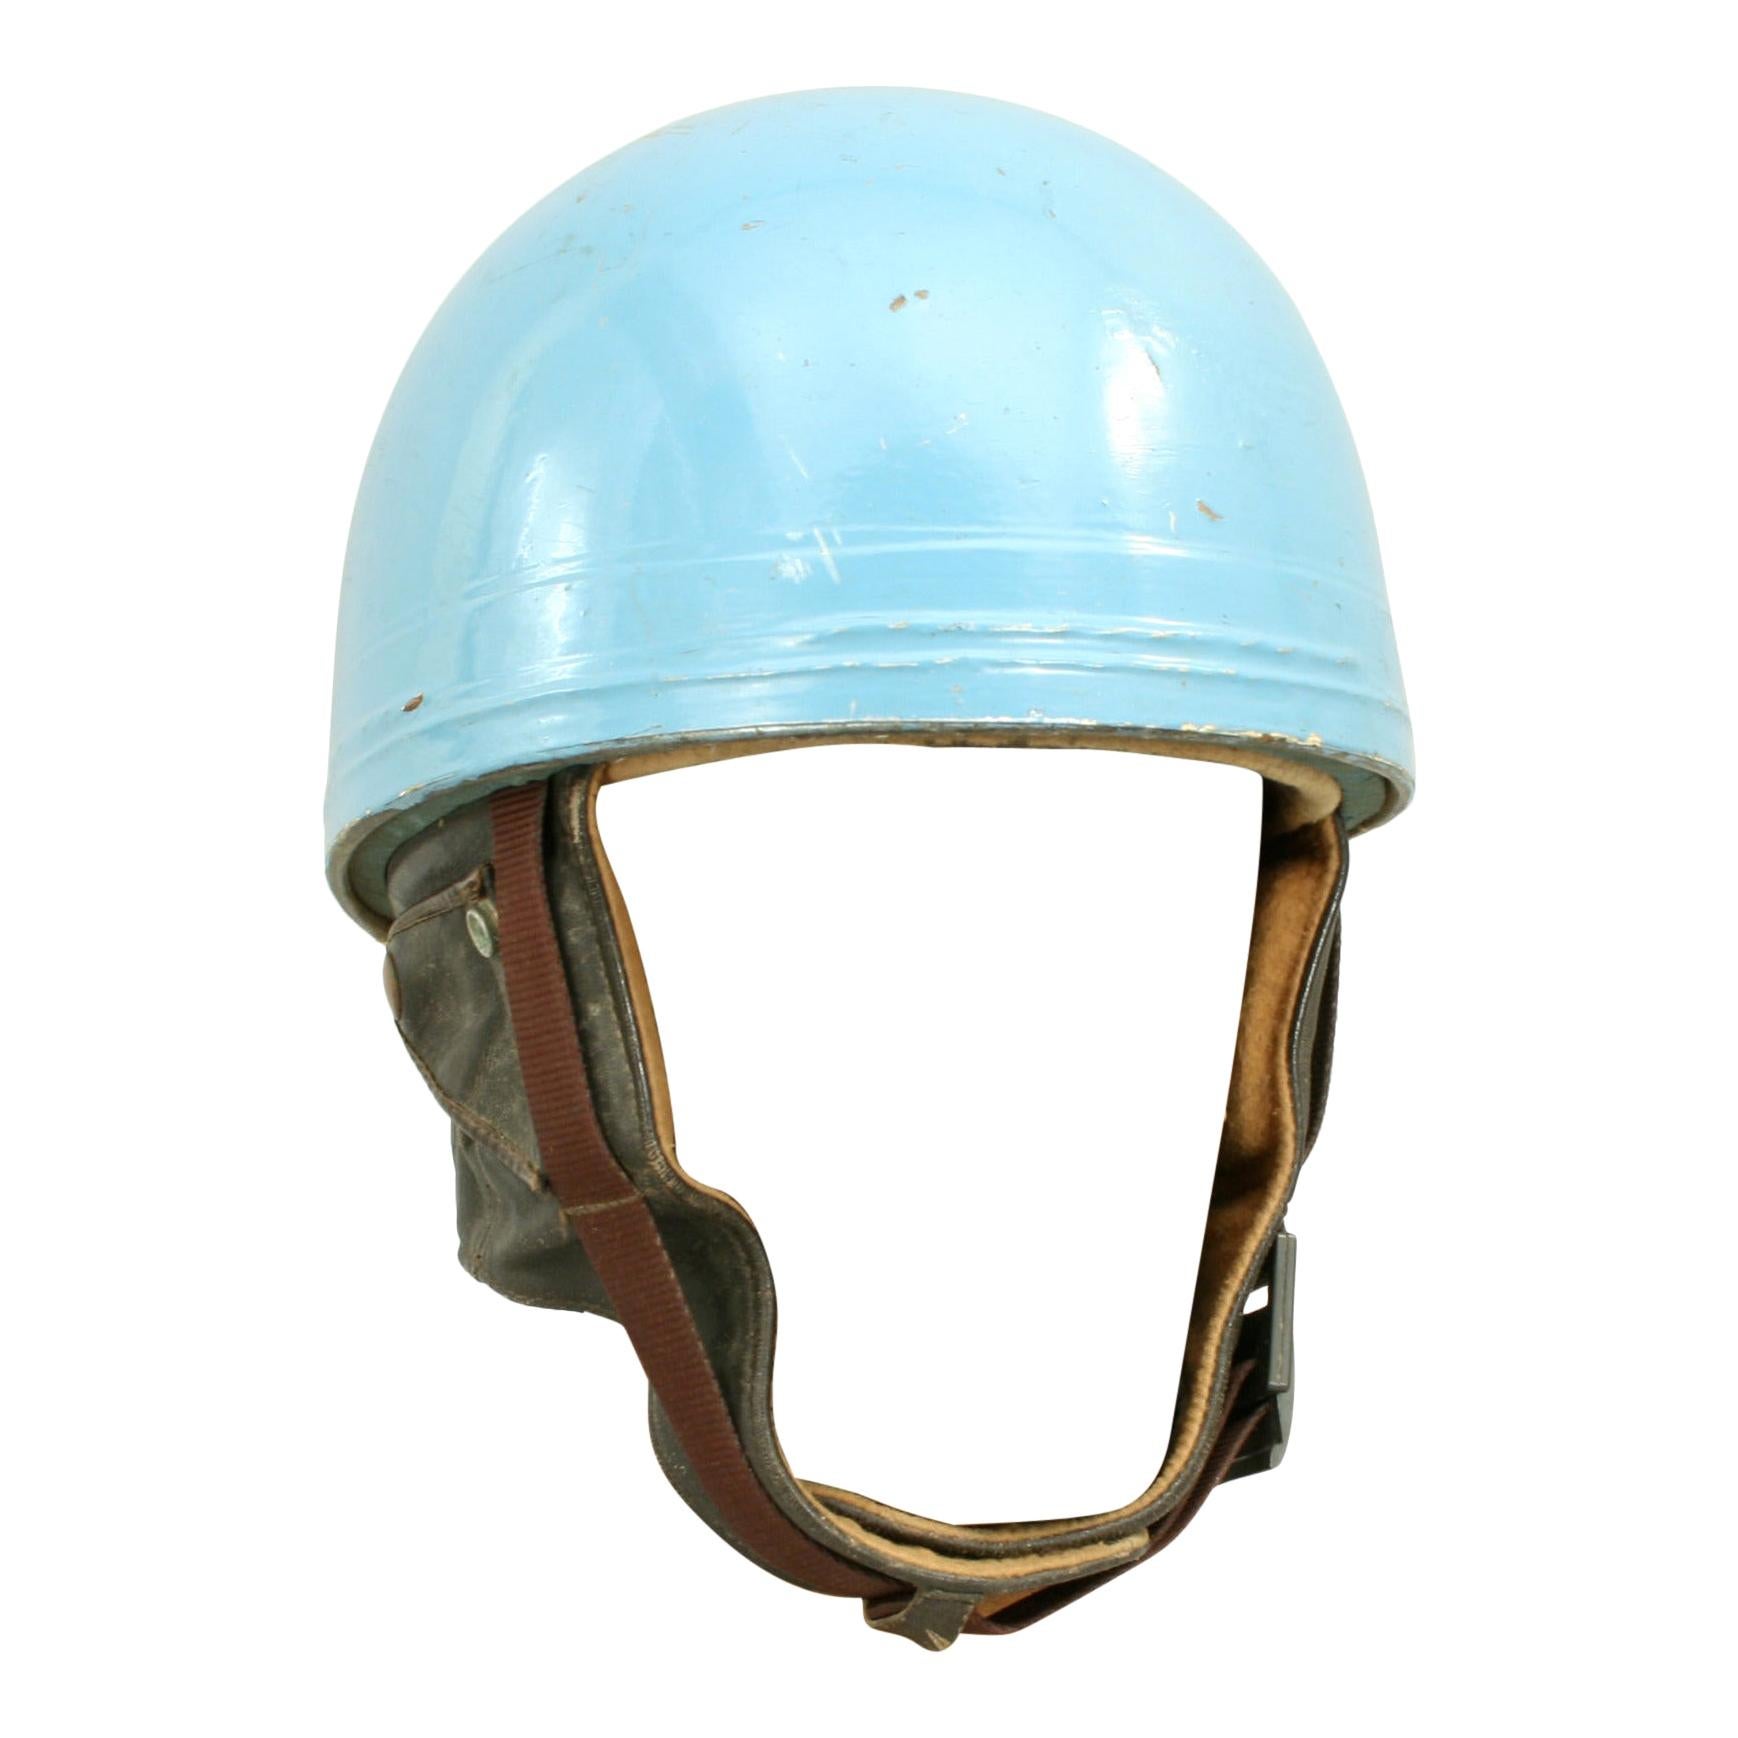 ACU Approved Cromwell Motorcycle Racing Helmet, Pudding Basin